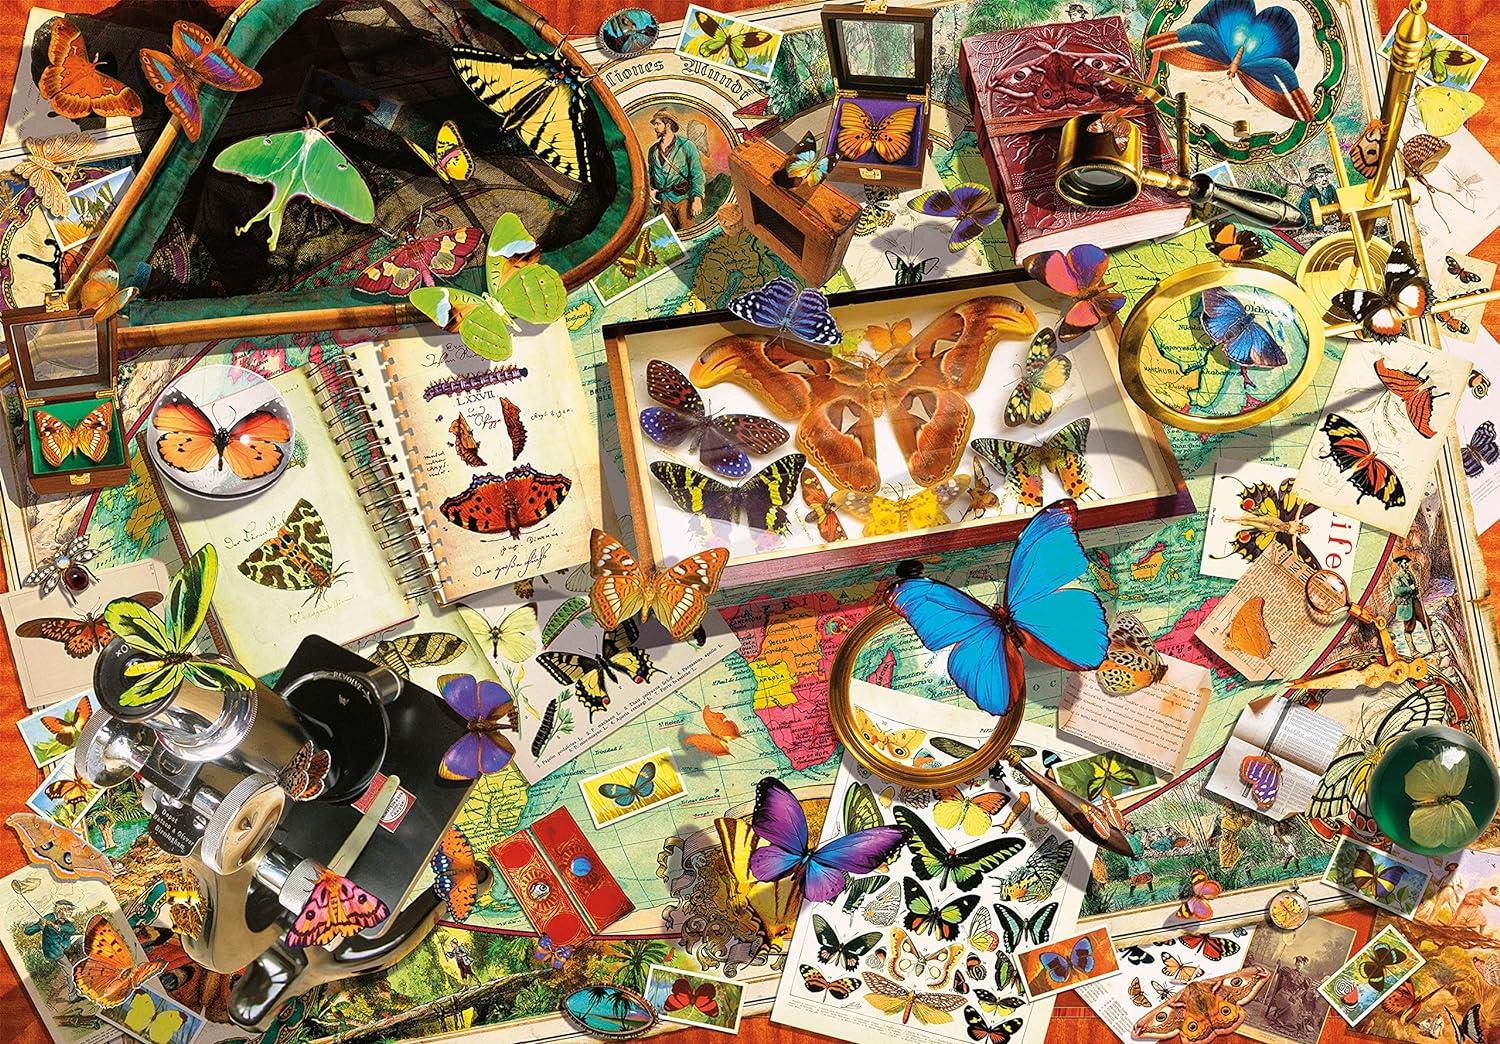 Clementoni  The Butterfly Collector High Quality Jigsaw Puzzle (500 Pieces) DAMAGED BOX